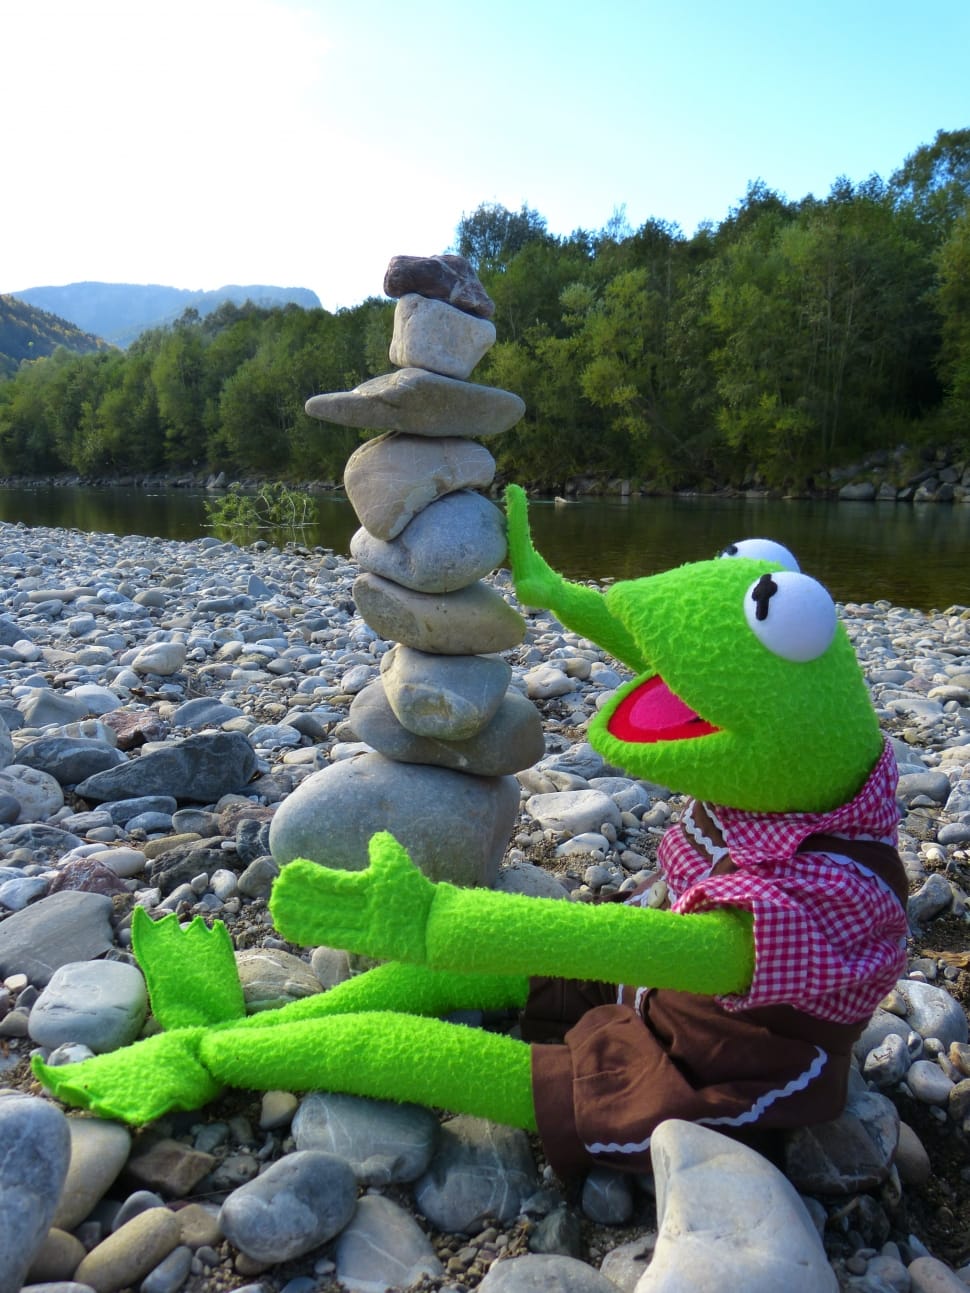 Cairn, Kermit, Stones, Frog, Build Tower, day, outdoors preview